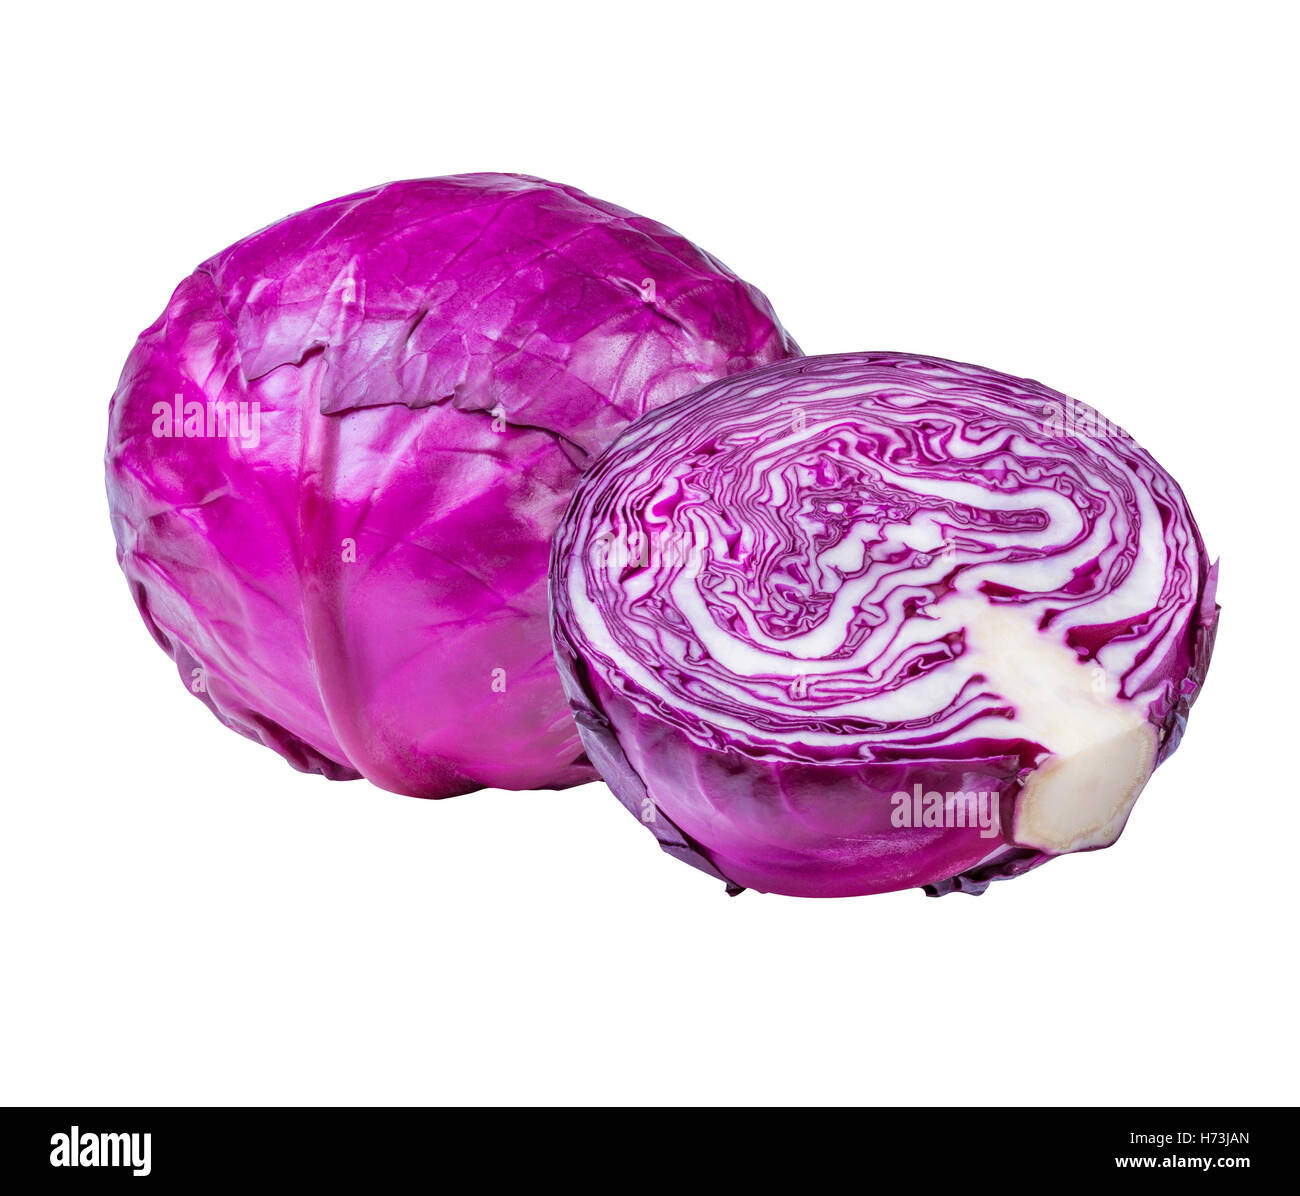 red cabbage isolated on white background Stock Photo